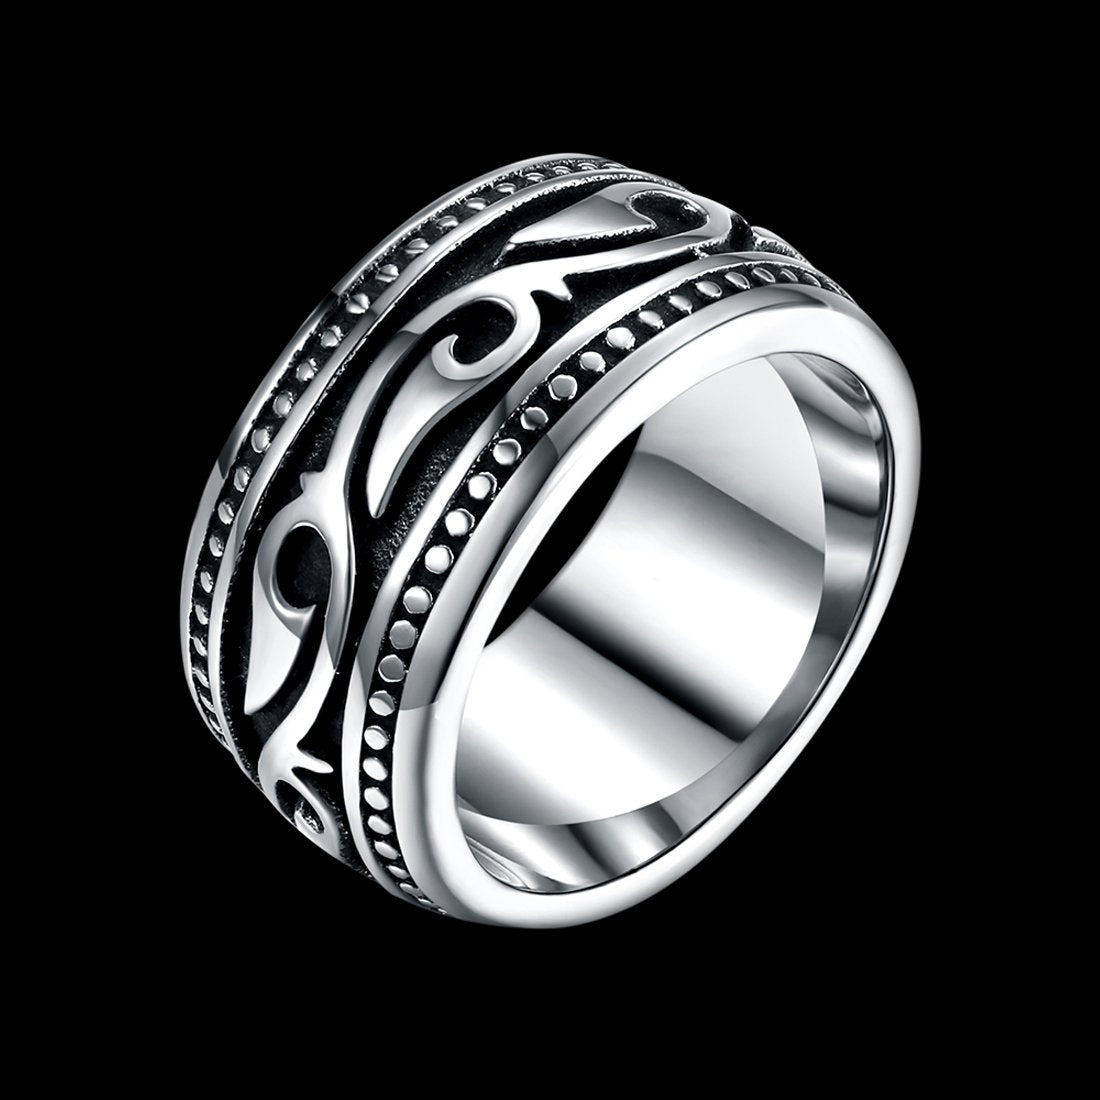 CEYLONMINE Silver Challa Ring for Unisex Adult (Silver) : Amazon.in:  Jewellery